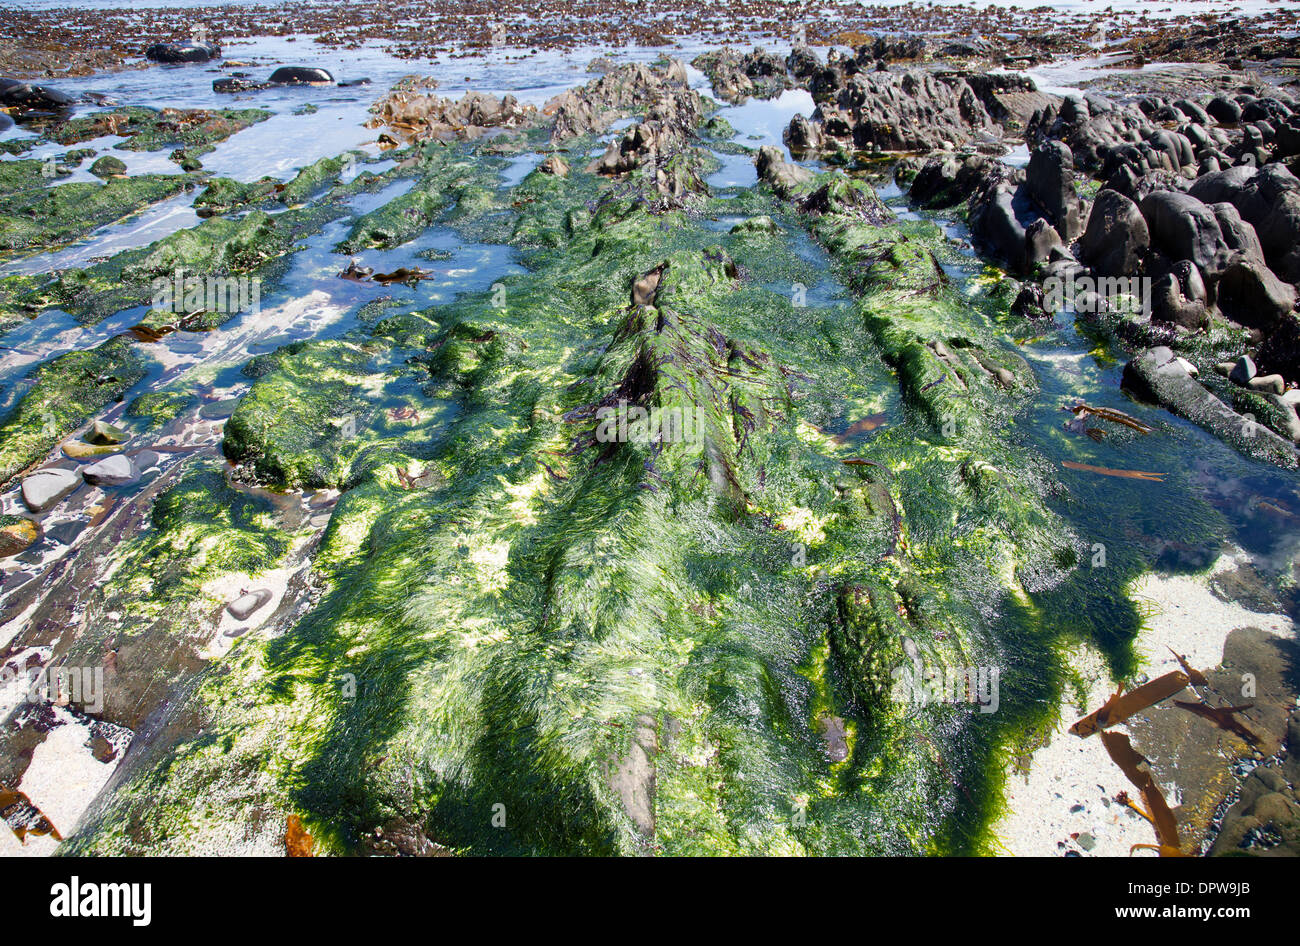 Algae on Rocks on beach in Sea Point - Cape Town - South Africa Stock Photo